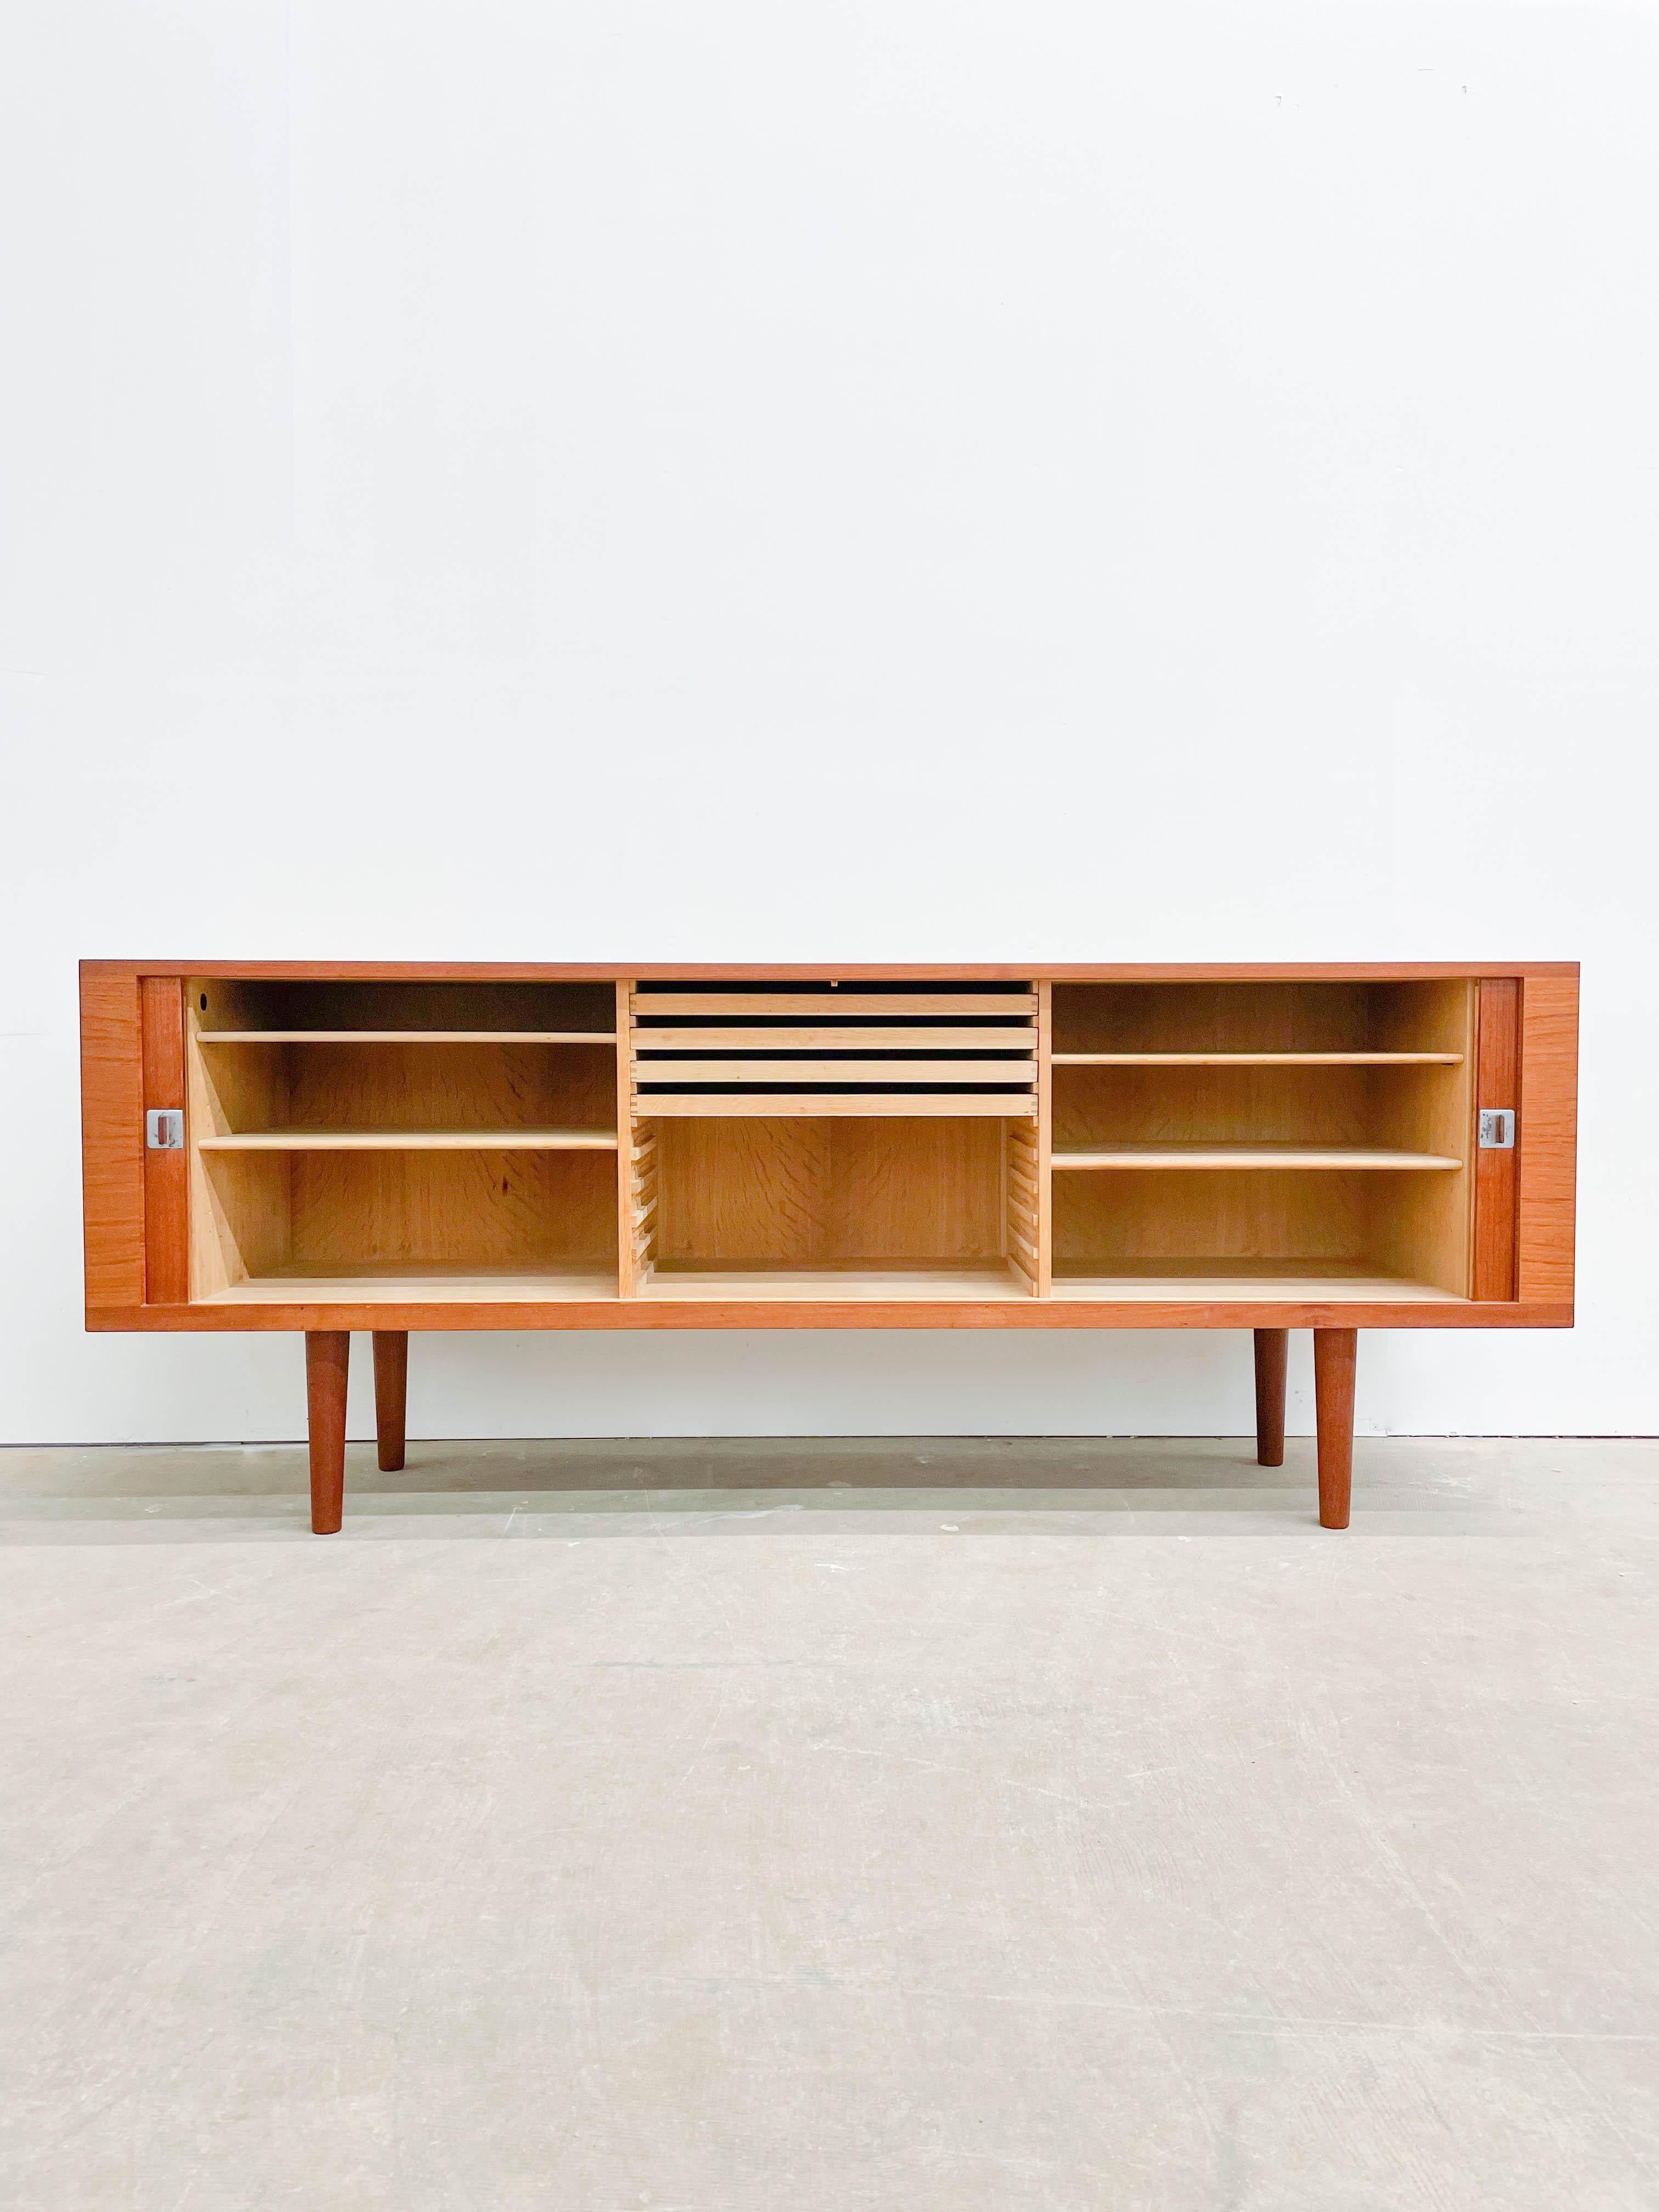 Excellent tambour front credenza designed by the master Hans Wegner for RY Mobler in the 1960s. Beautiful teak case with quartersawn oak interior behind a superb tambour door. Teak pulls with chrome plates add a touch of glamour. This piece is in